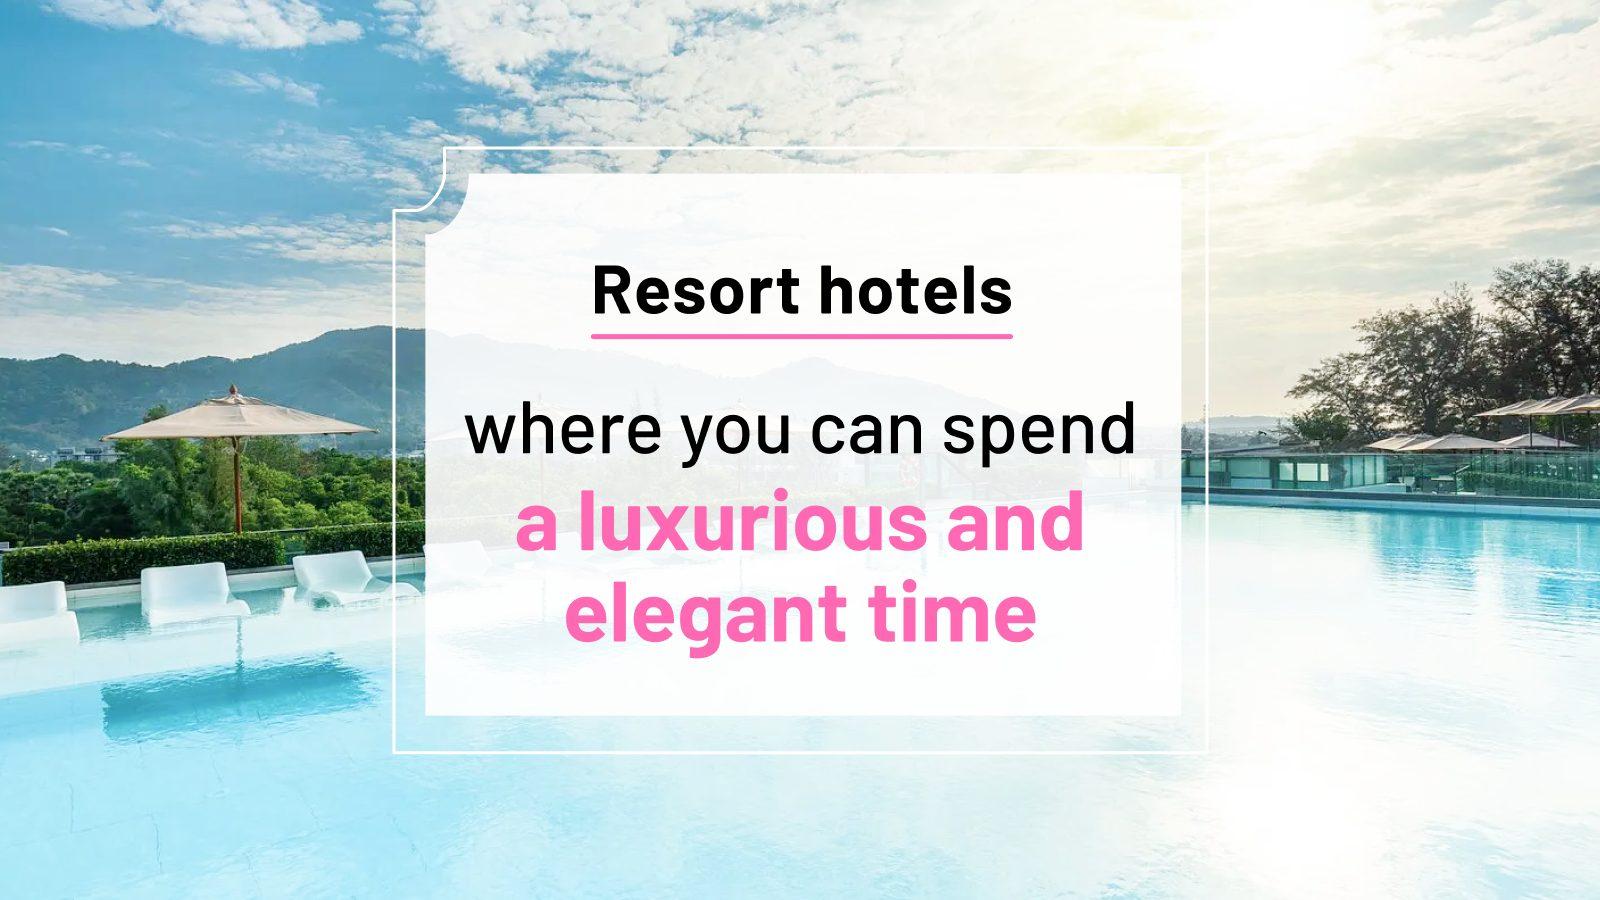 Healing Resort Hotels for Enjoying Luxurious Time｜How to spend an elegant hotel stay &#8211; HafH